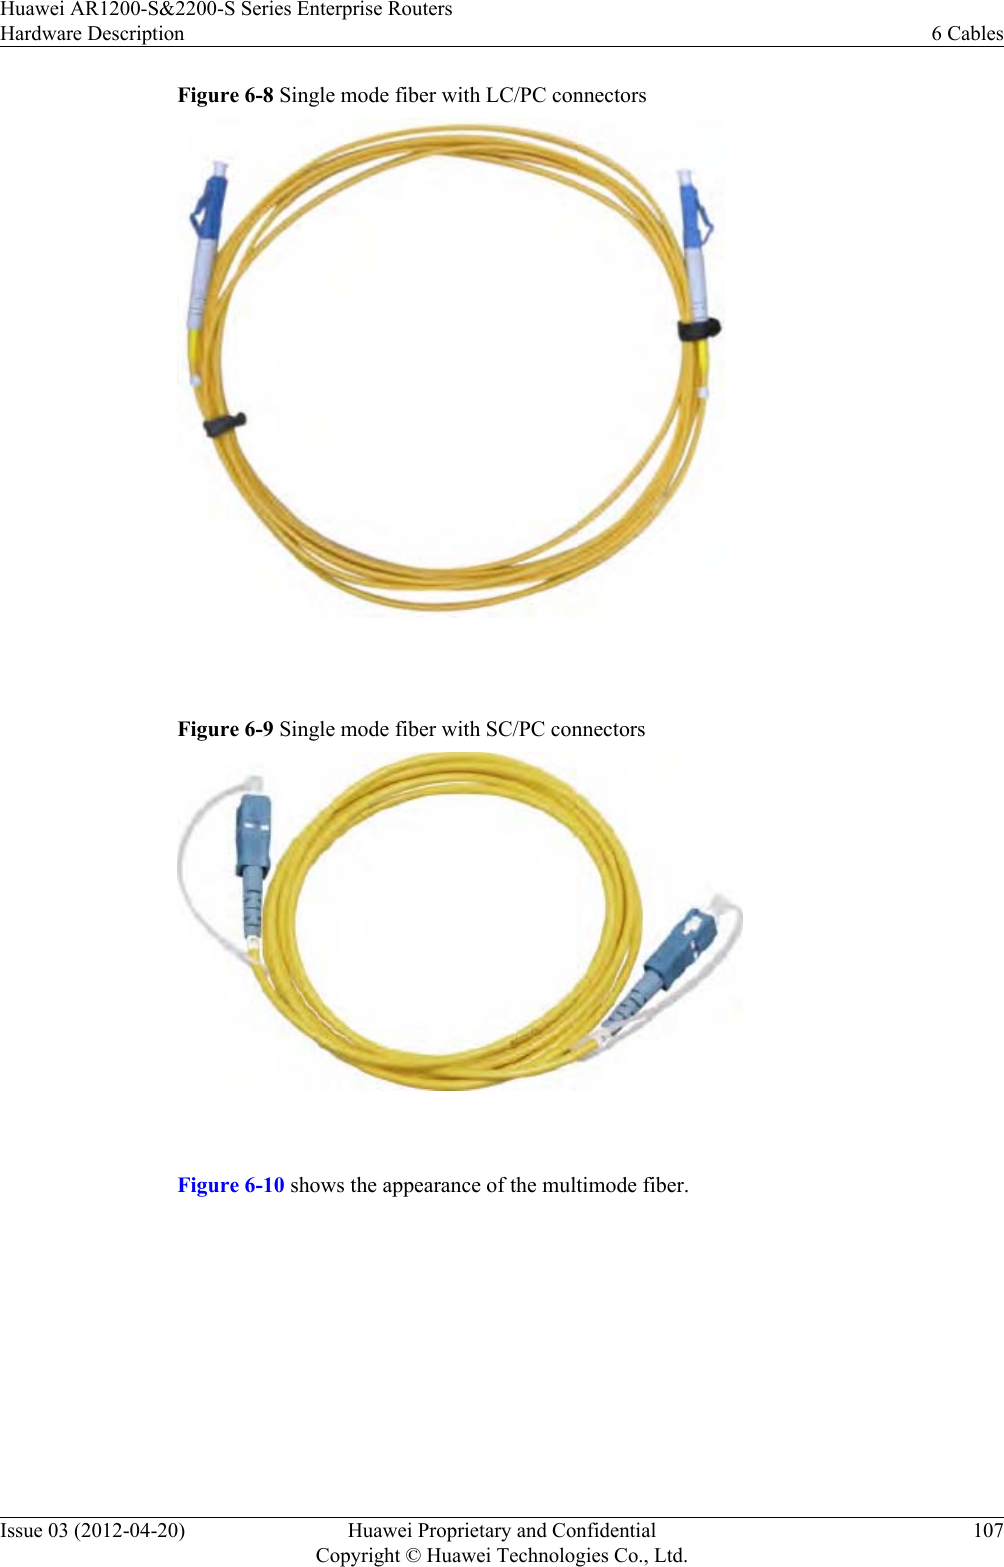 Figure 6-8 Single mode fiber with LC/PC connectors Figure 6-9 Single mode fiber with SC/PC connectors Figure 6-10 shows the appearance of the multimode fiber.Huawei AR1200-S&amp;2200-S Series Enterprise RoutersHardware Description 6 CablesIssue 03 (2012-04-20) Huawei Proprietary and ConfidentialCopyright © Huawei Technologies Co., Ltd.107